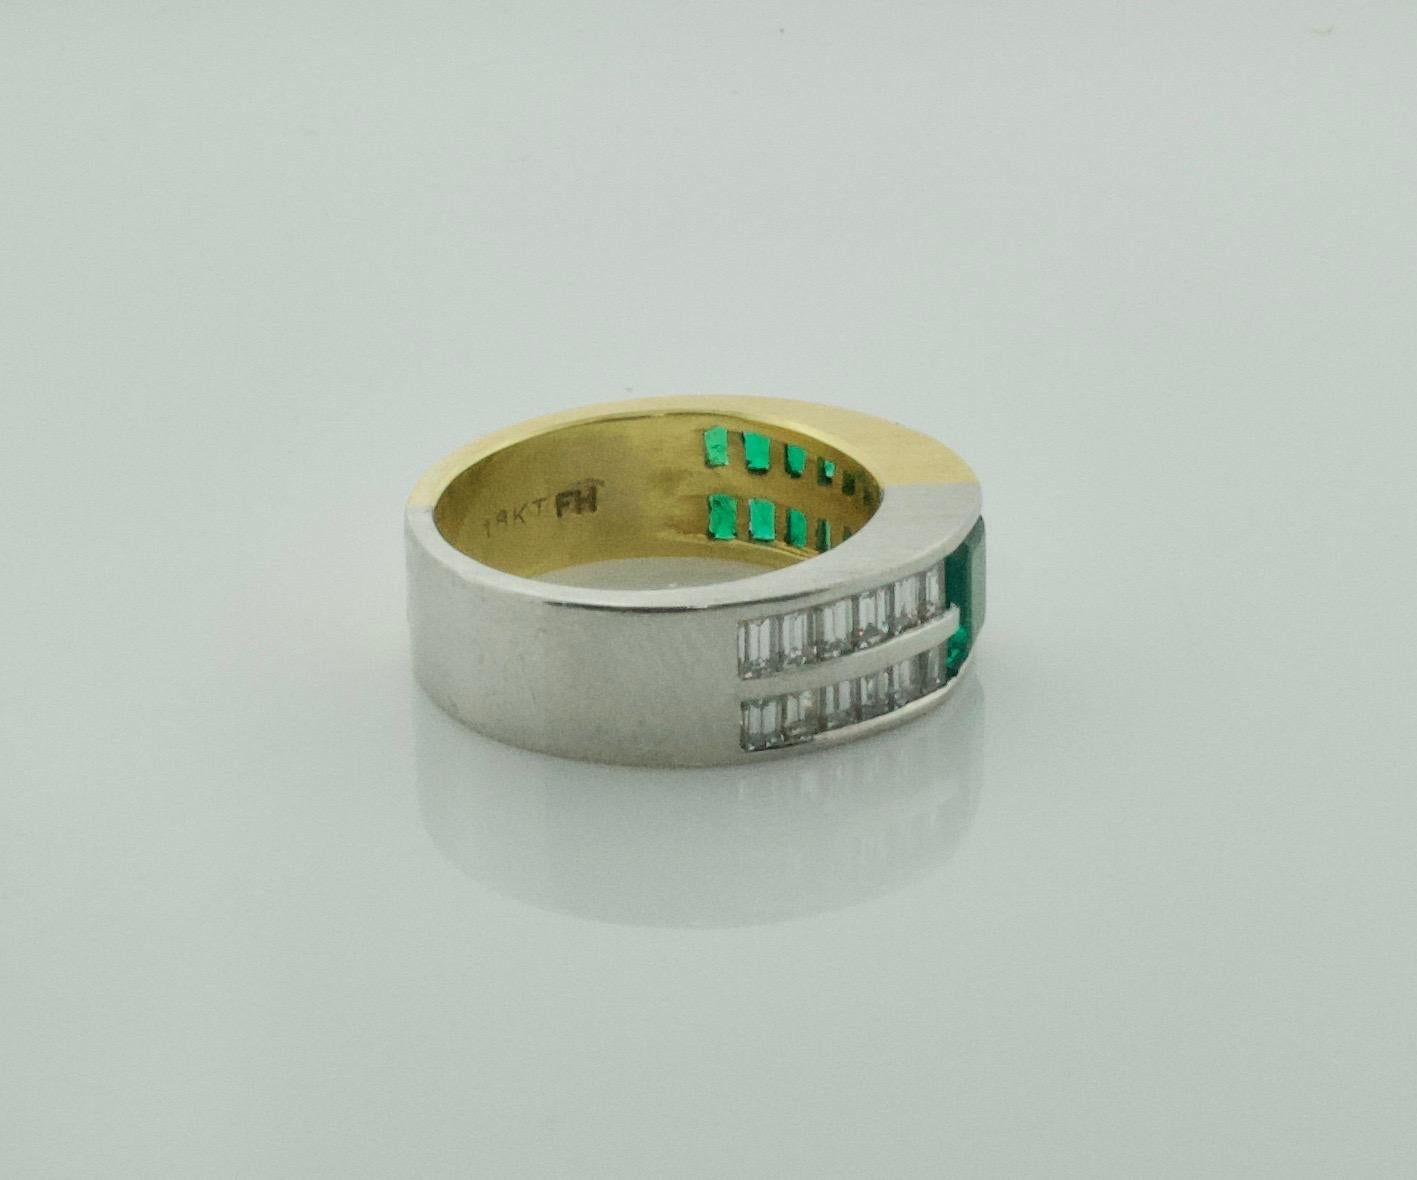 Custom Designed Emerald and Diamond Wedding Band in 18 Karat Gold and Platinum In Good Condition For Sale In Wailea, HI